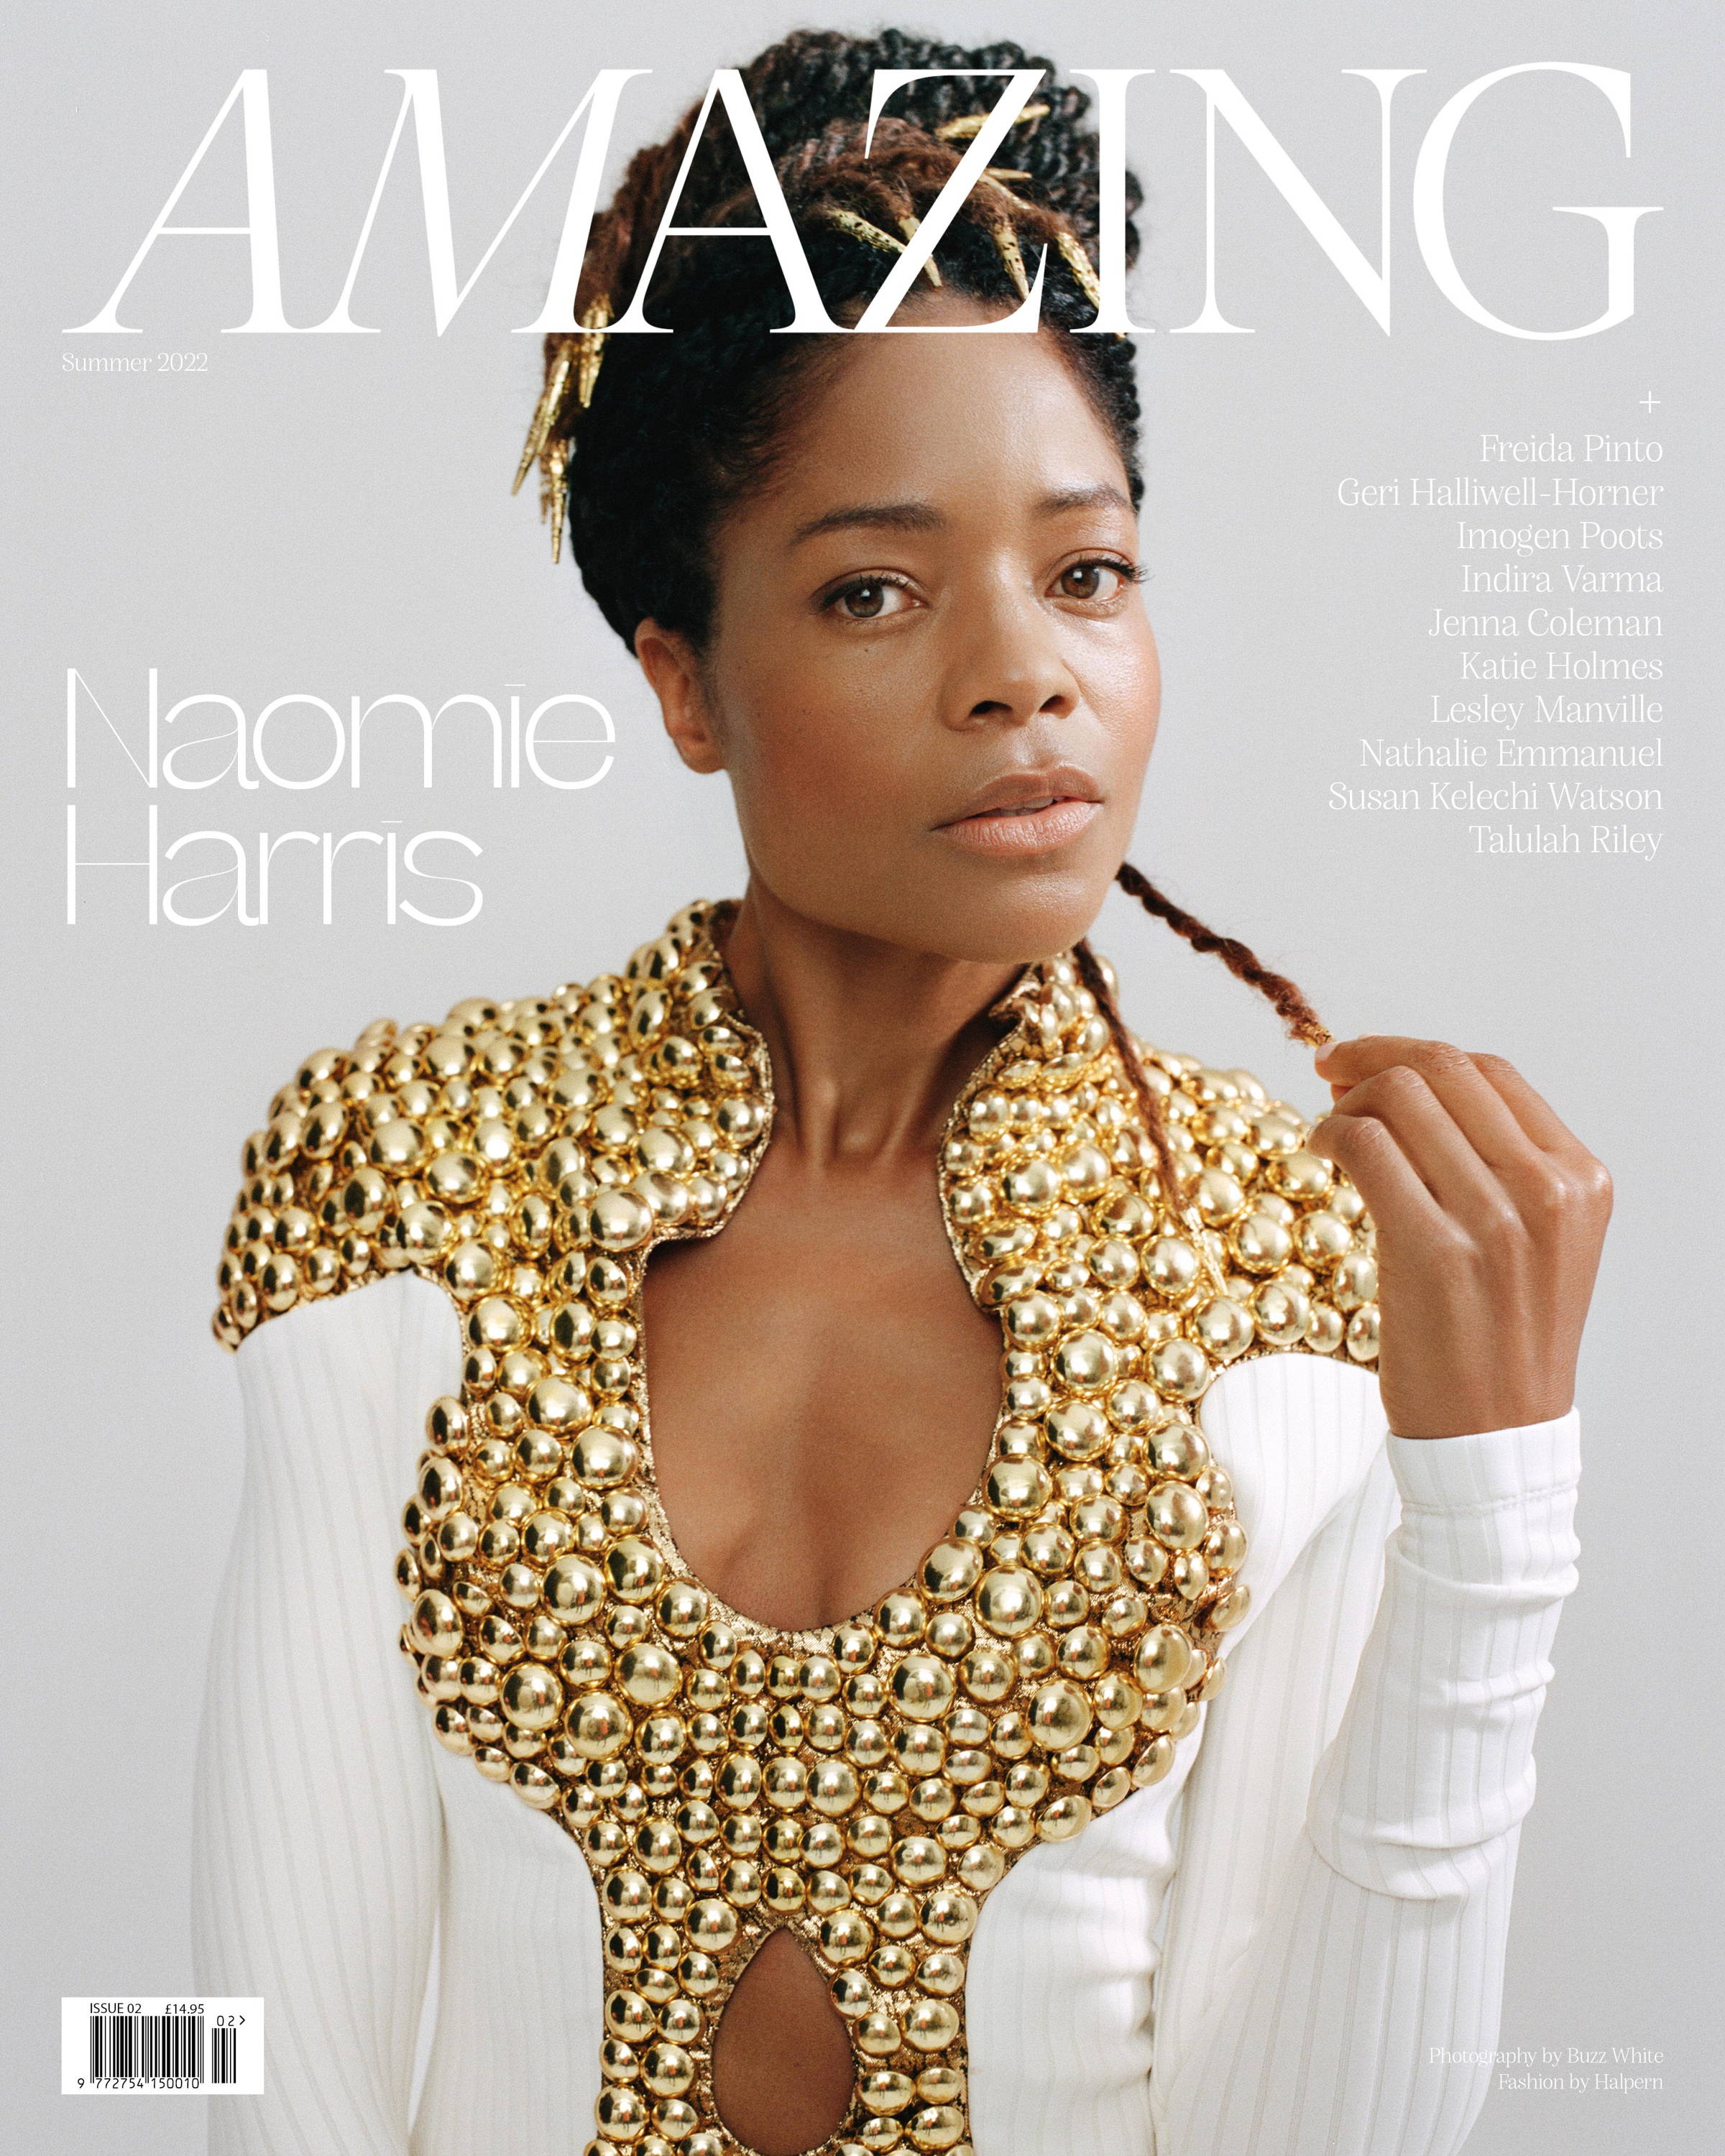 Naomie Harris keeps it real. The Bond actor may have Hollywood calling, but she prefers to live life under the celebrity radar, travelling by bus and sticking close to home.